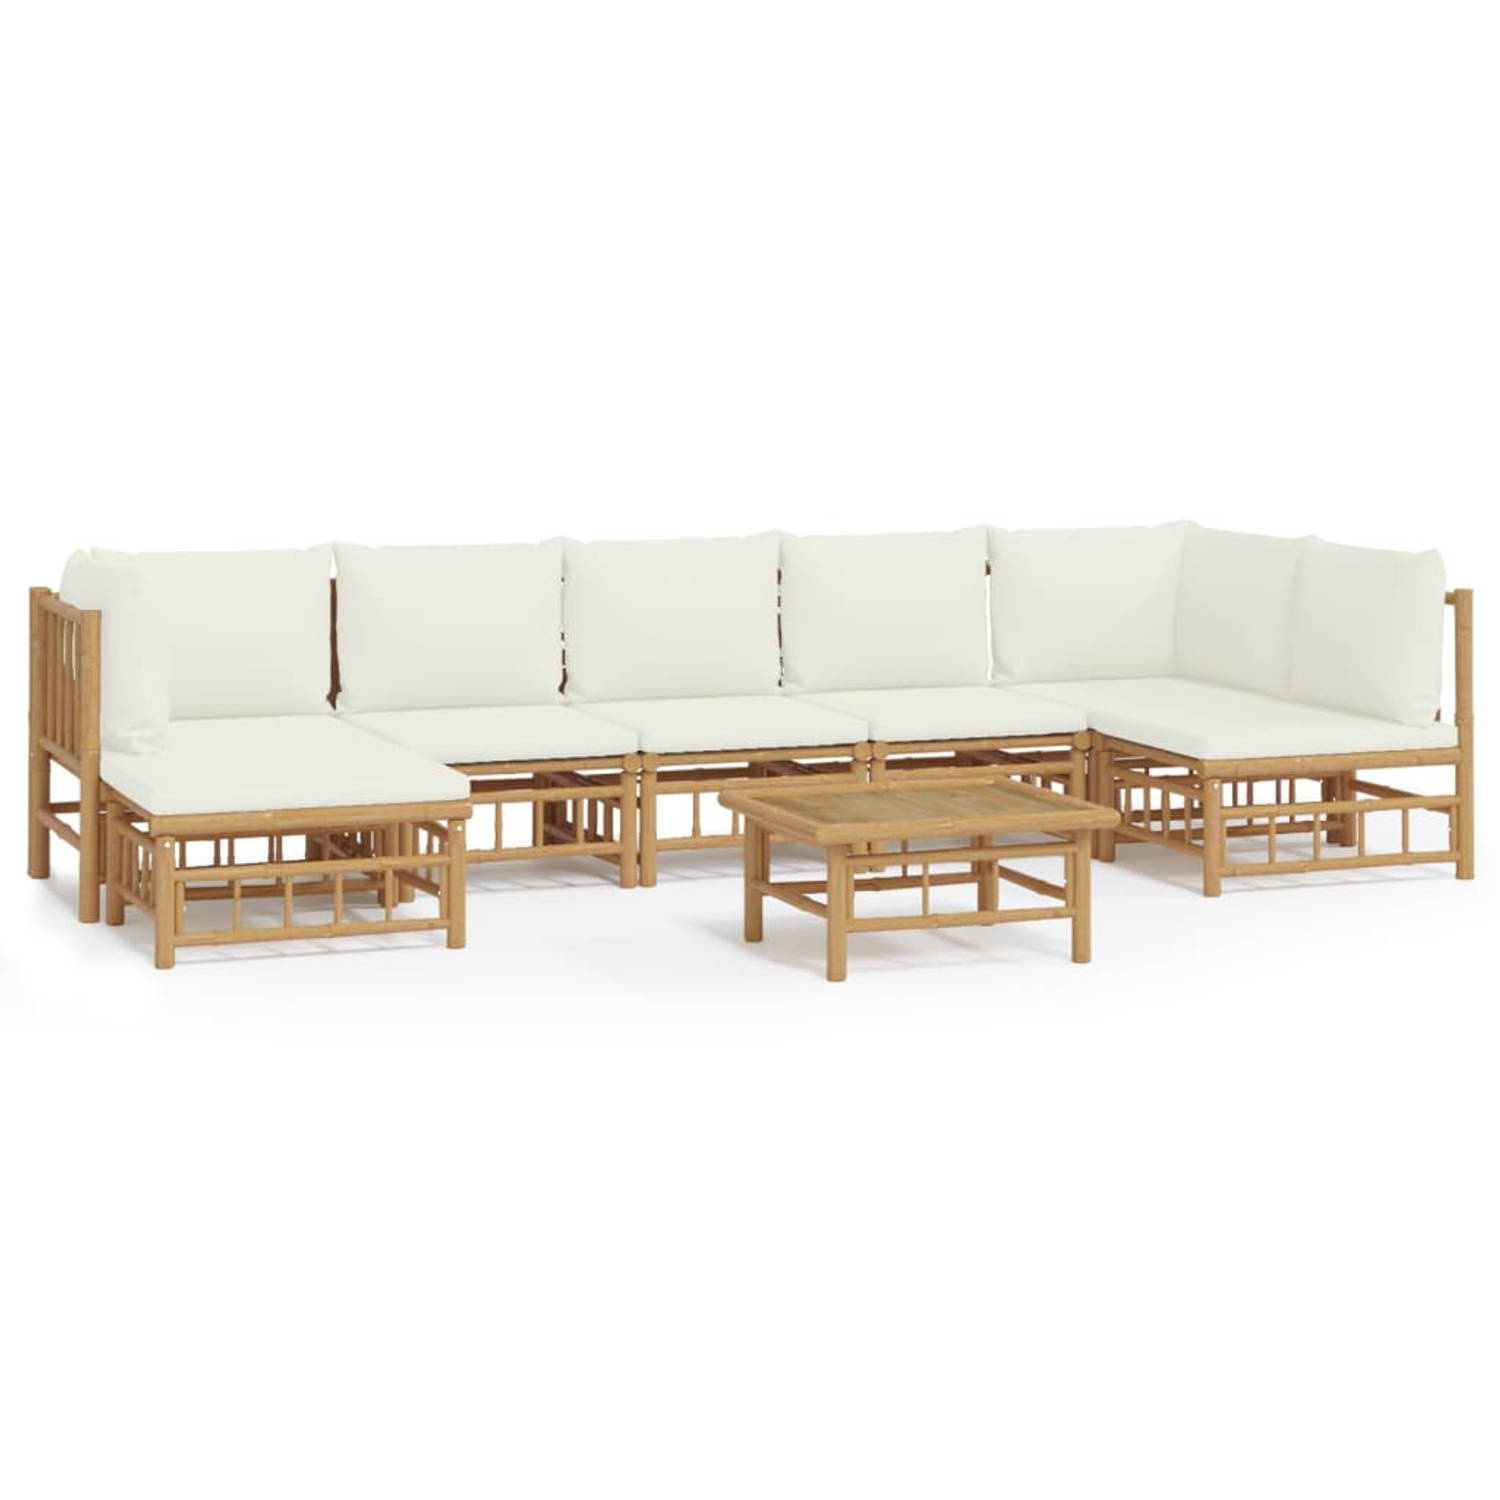 The Living Store 8-delige Loungeset met kussens bamboe crèmewit - Tuinset